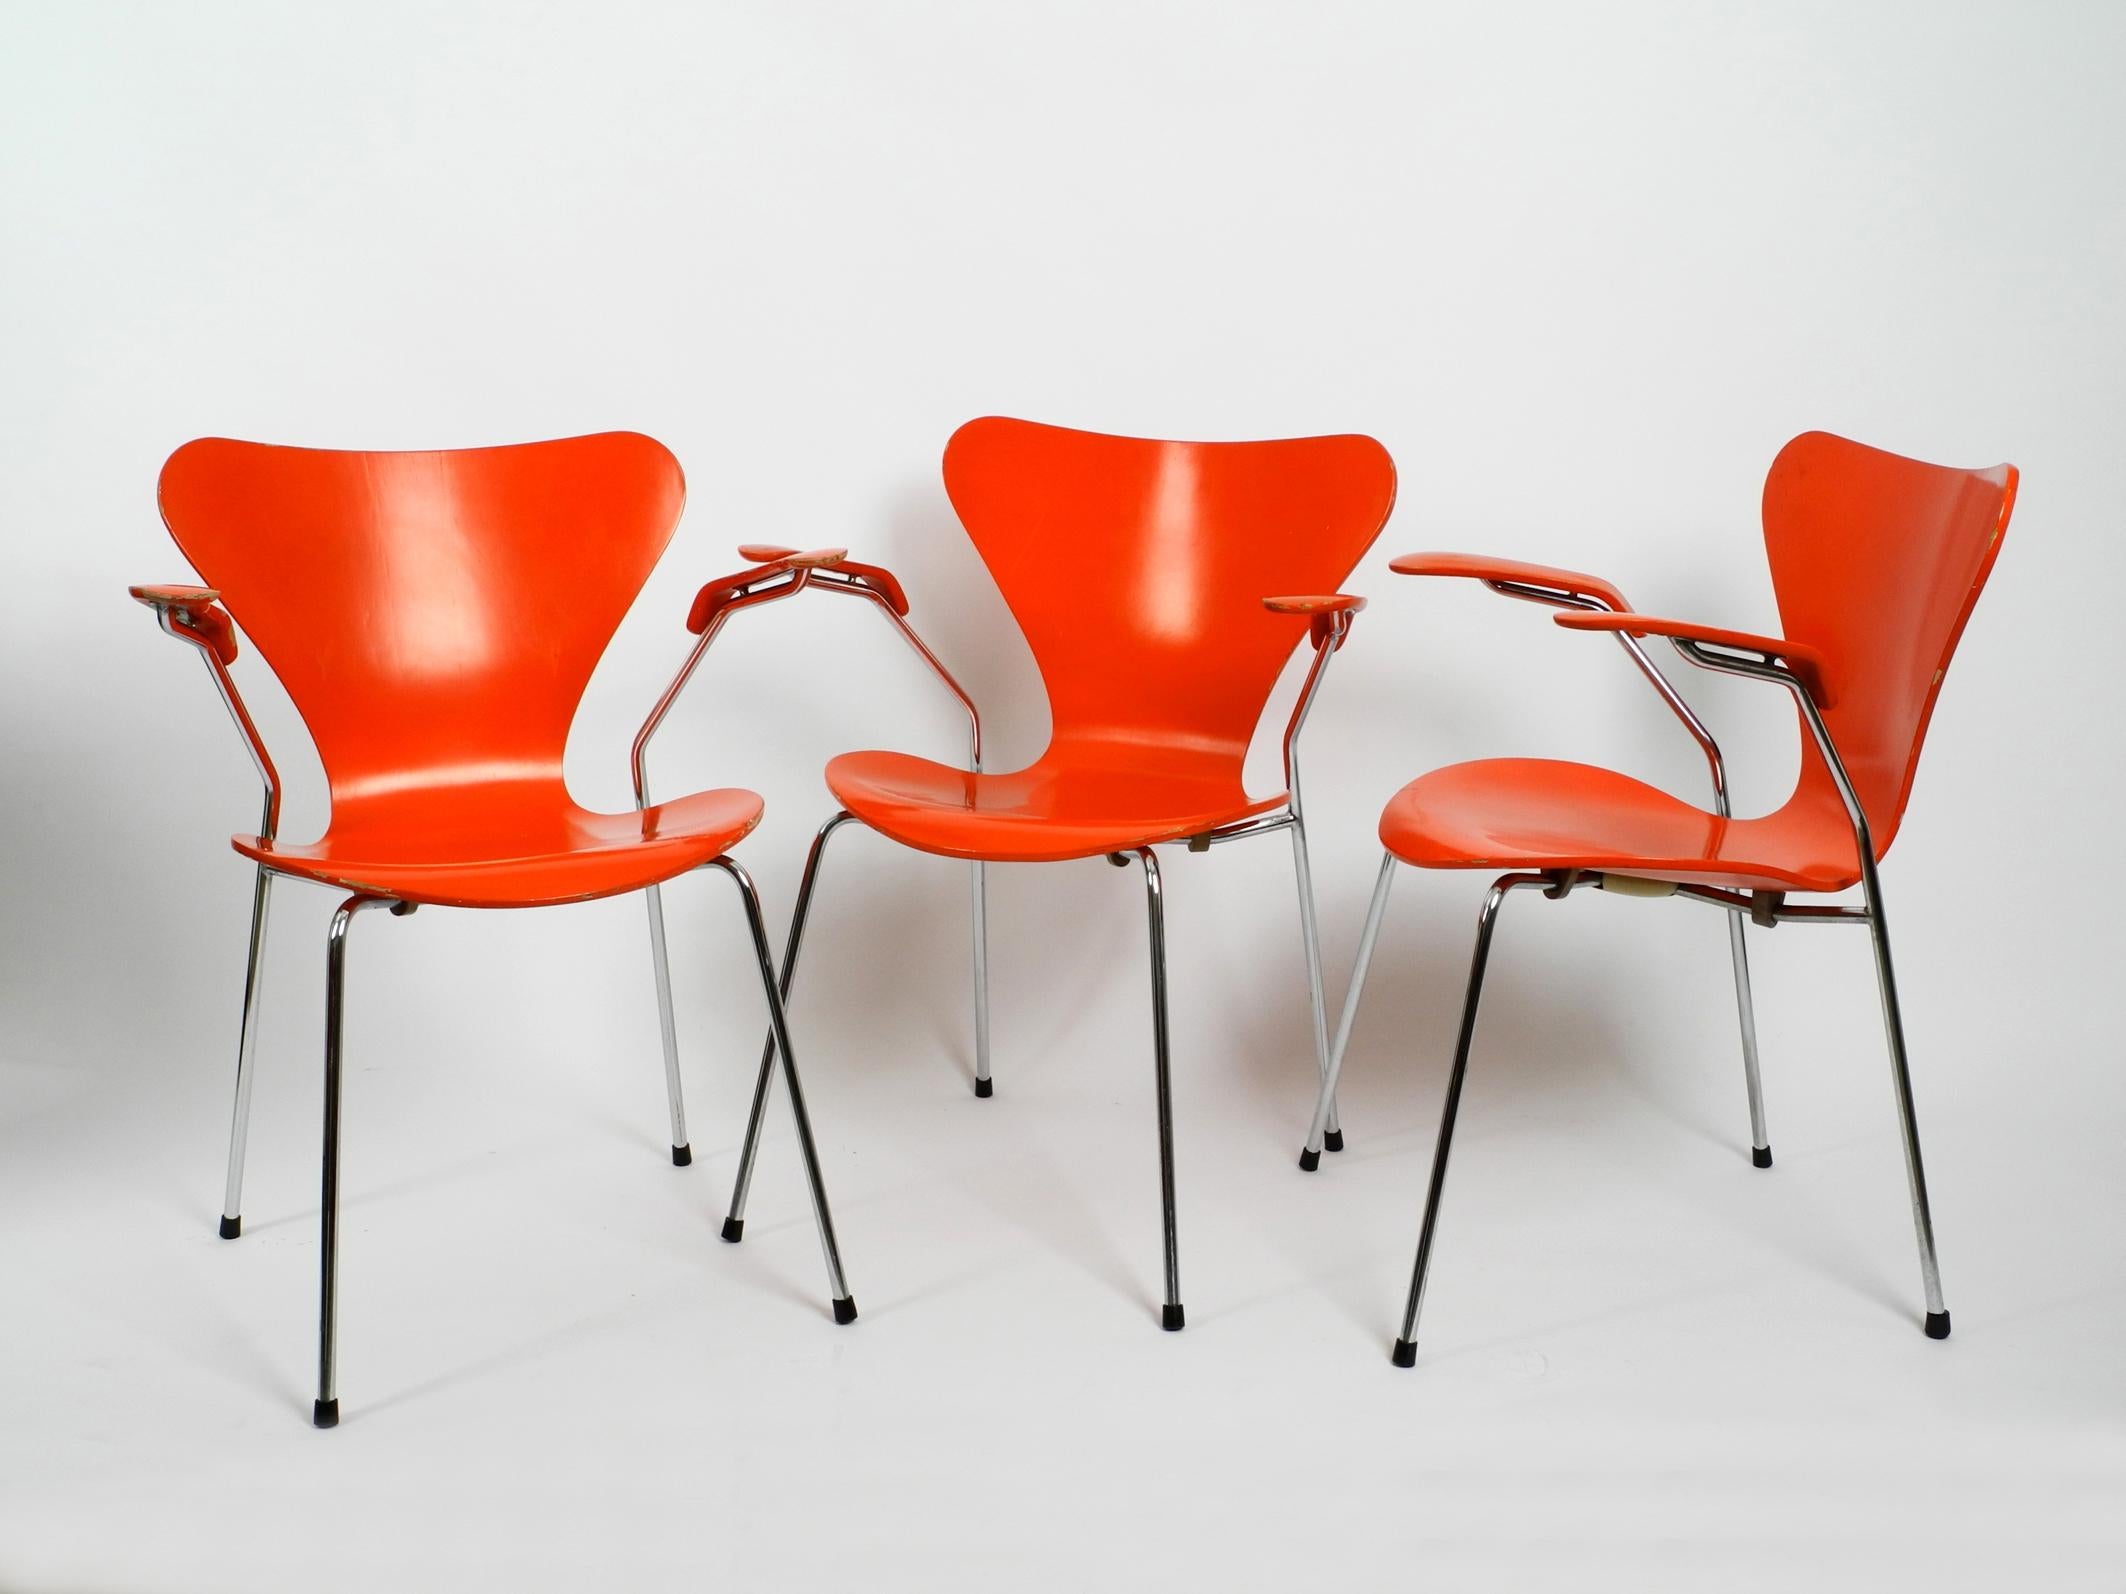 Three original Arne Jacobsen armchairs made of laminated plywood Mod. 3207.
chrome-plated tubular steel frame.
Very rare with the original paint in orange from 1982. 
Made by Fritz Hansen Denmark. With original label on the bottom.
No damages